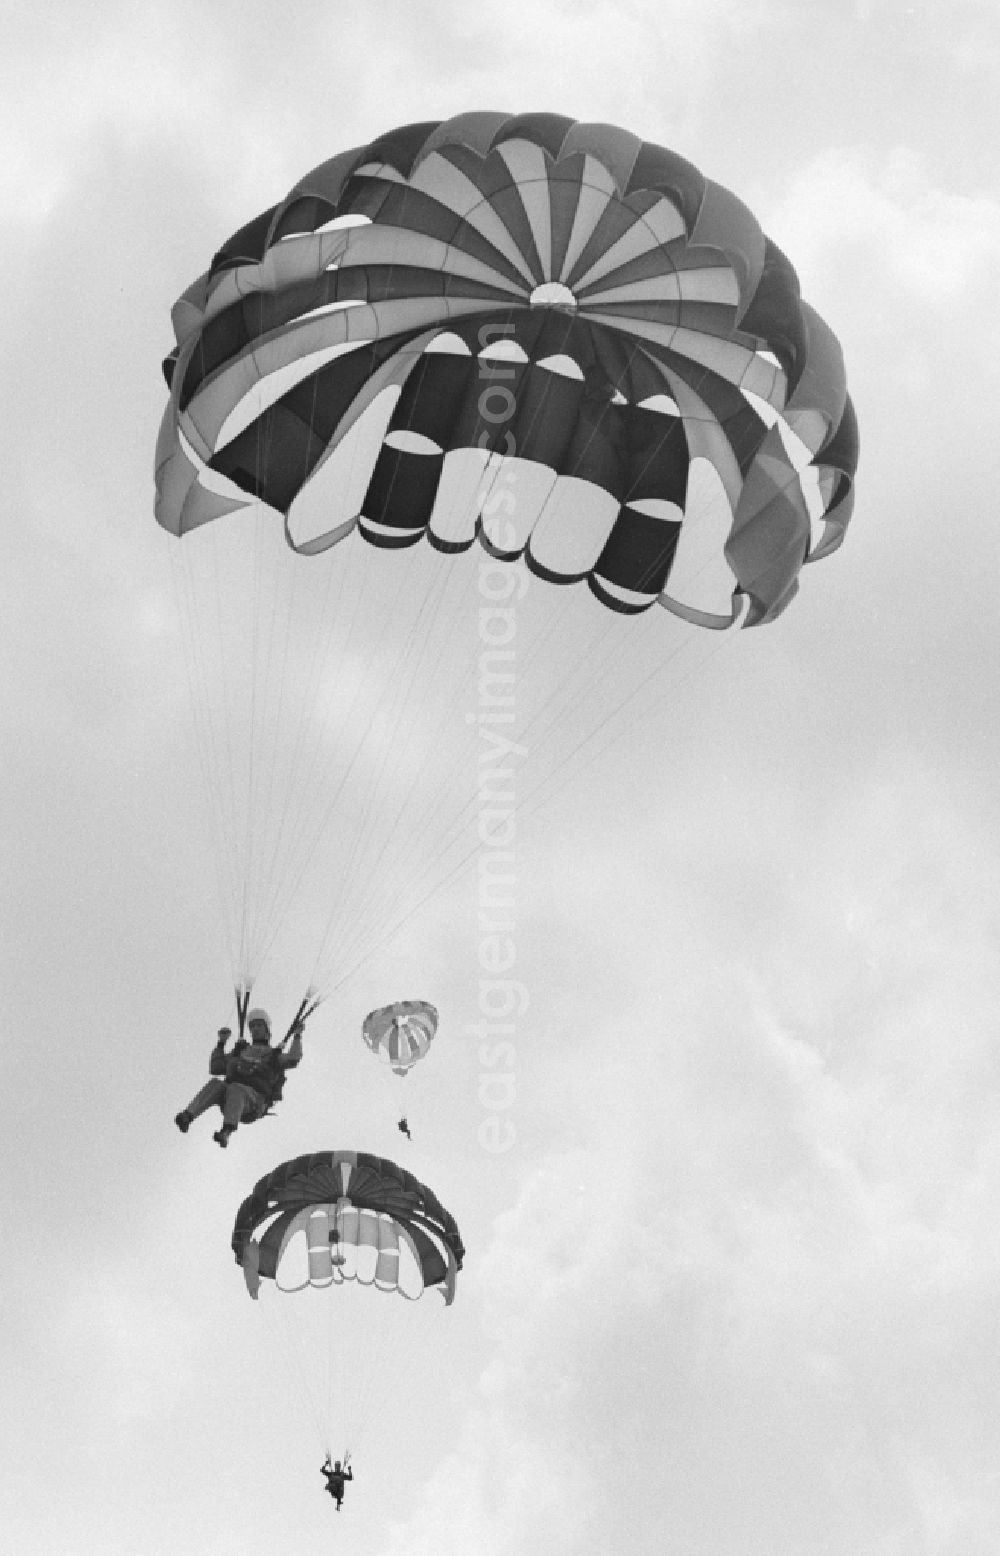 GDR image archive: Chemnitz - GDR Championships in parachuting in Karl-Marx-Stadt today Chemnitz in Saxony in the area of the former GDR, German Democratic Republic